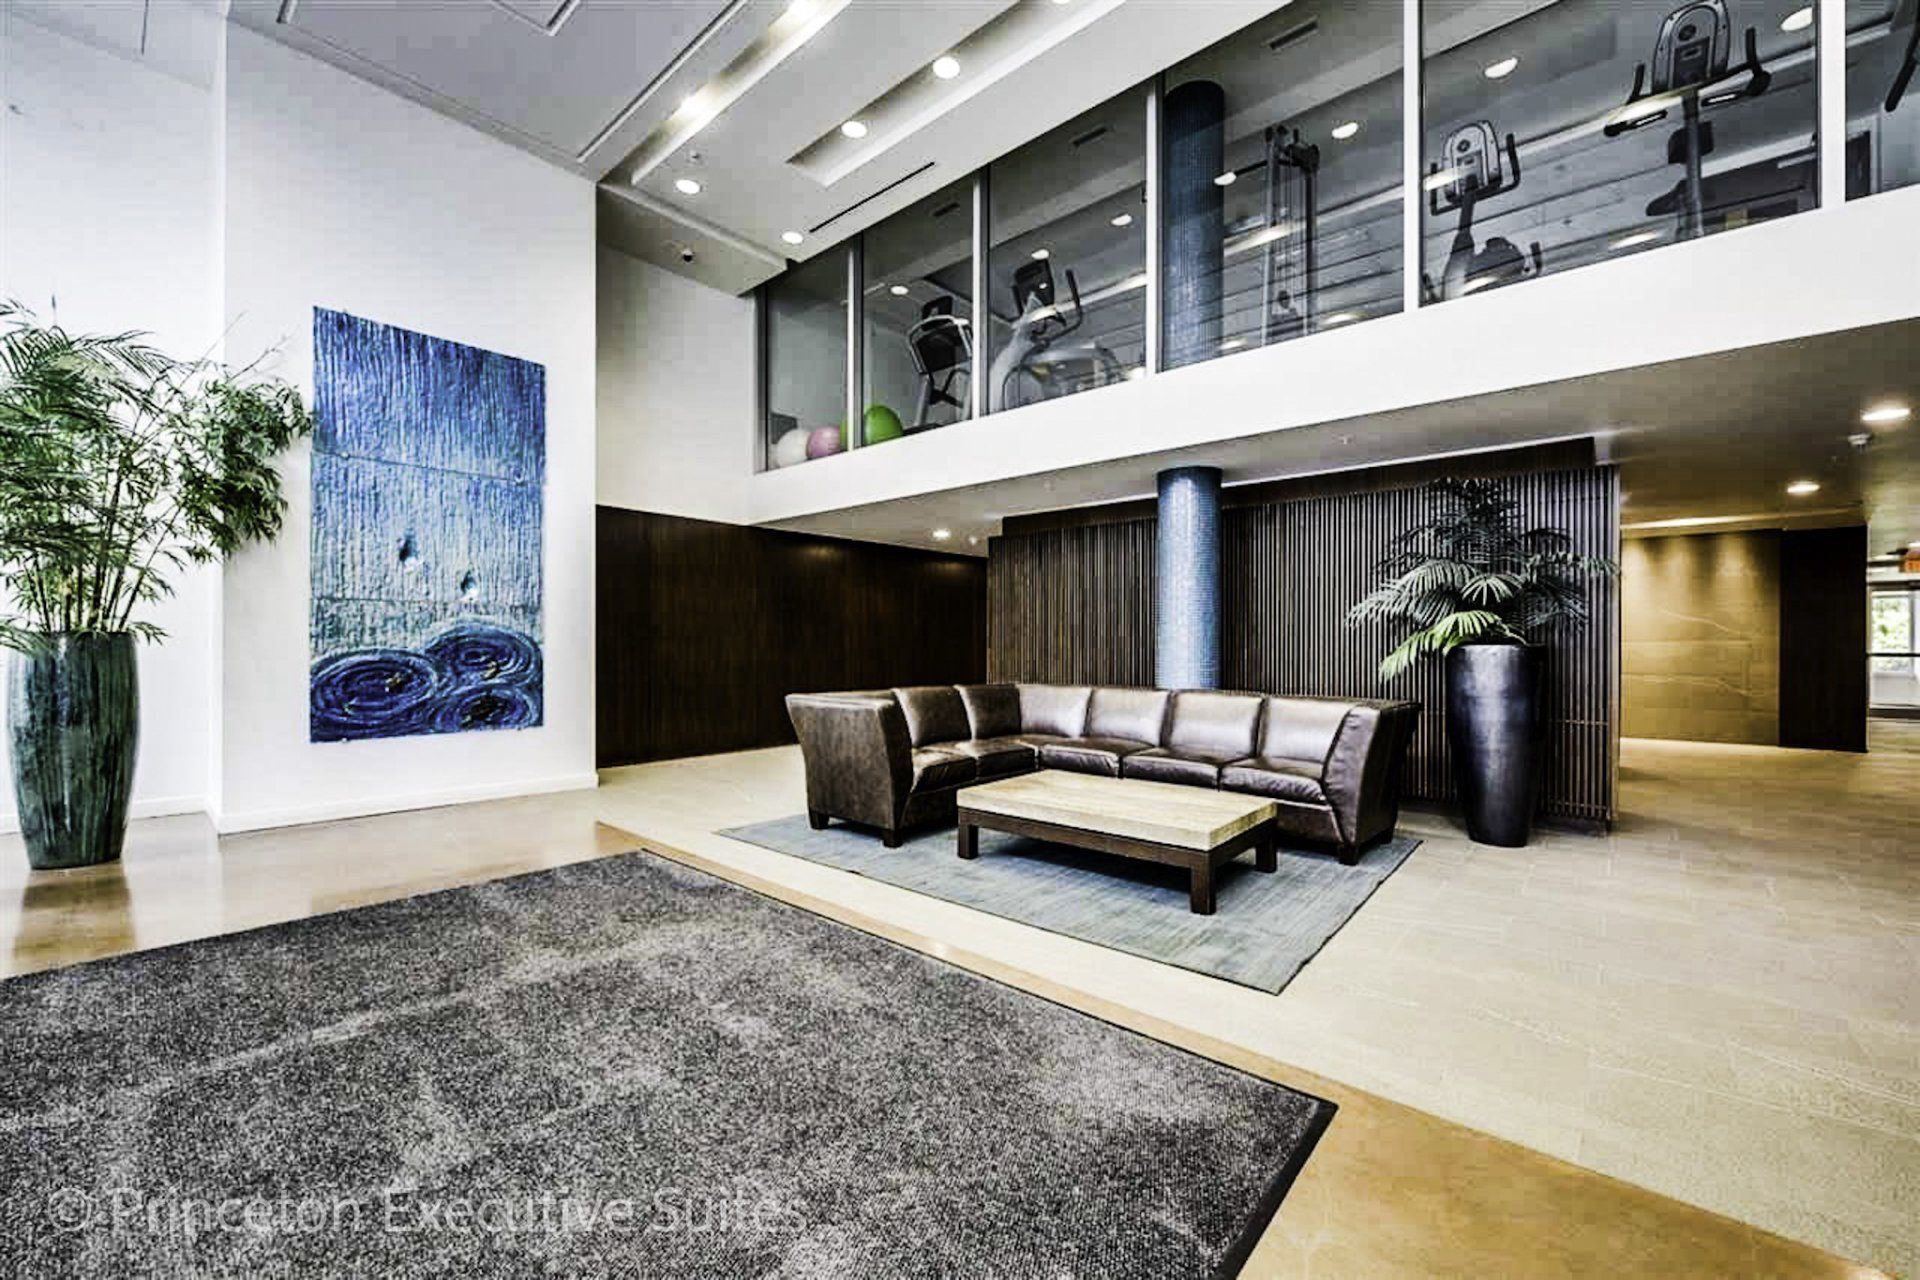 Large marble lobby area stunningly decorated with giant tropical plants and modern blue abstract wall artwork.   Large brown leather sectional couch sits in the centre of the lobby.   A rectangle brown and beige coffee  table sits in front of the sectional.    Above the sectional is a large window overlooking the lobby inside you can see fitness training equipment|princeton suites edmonton furnished suites